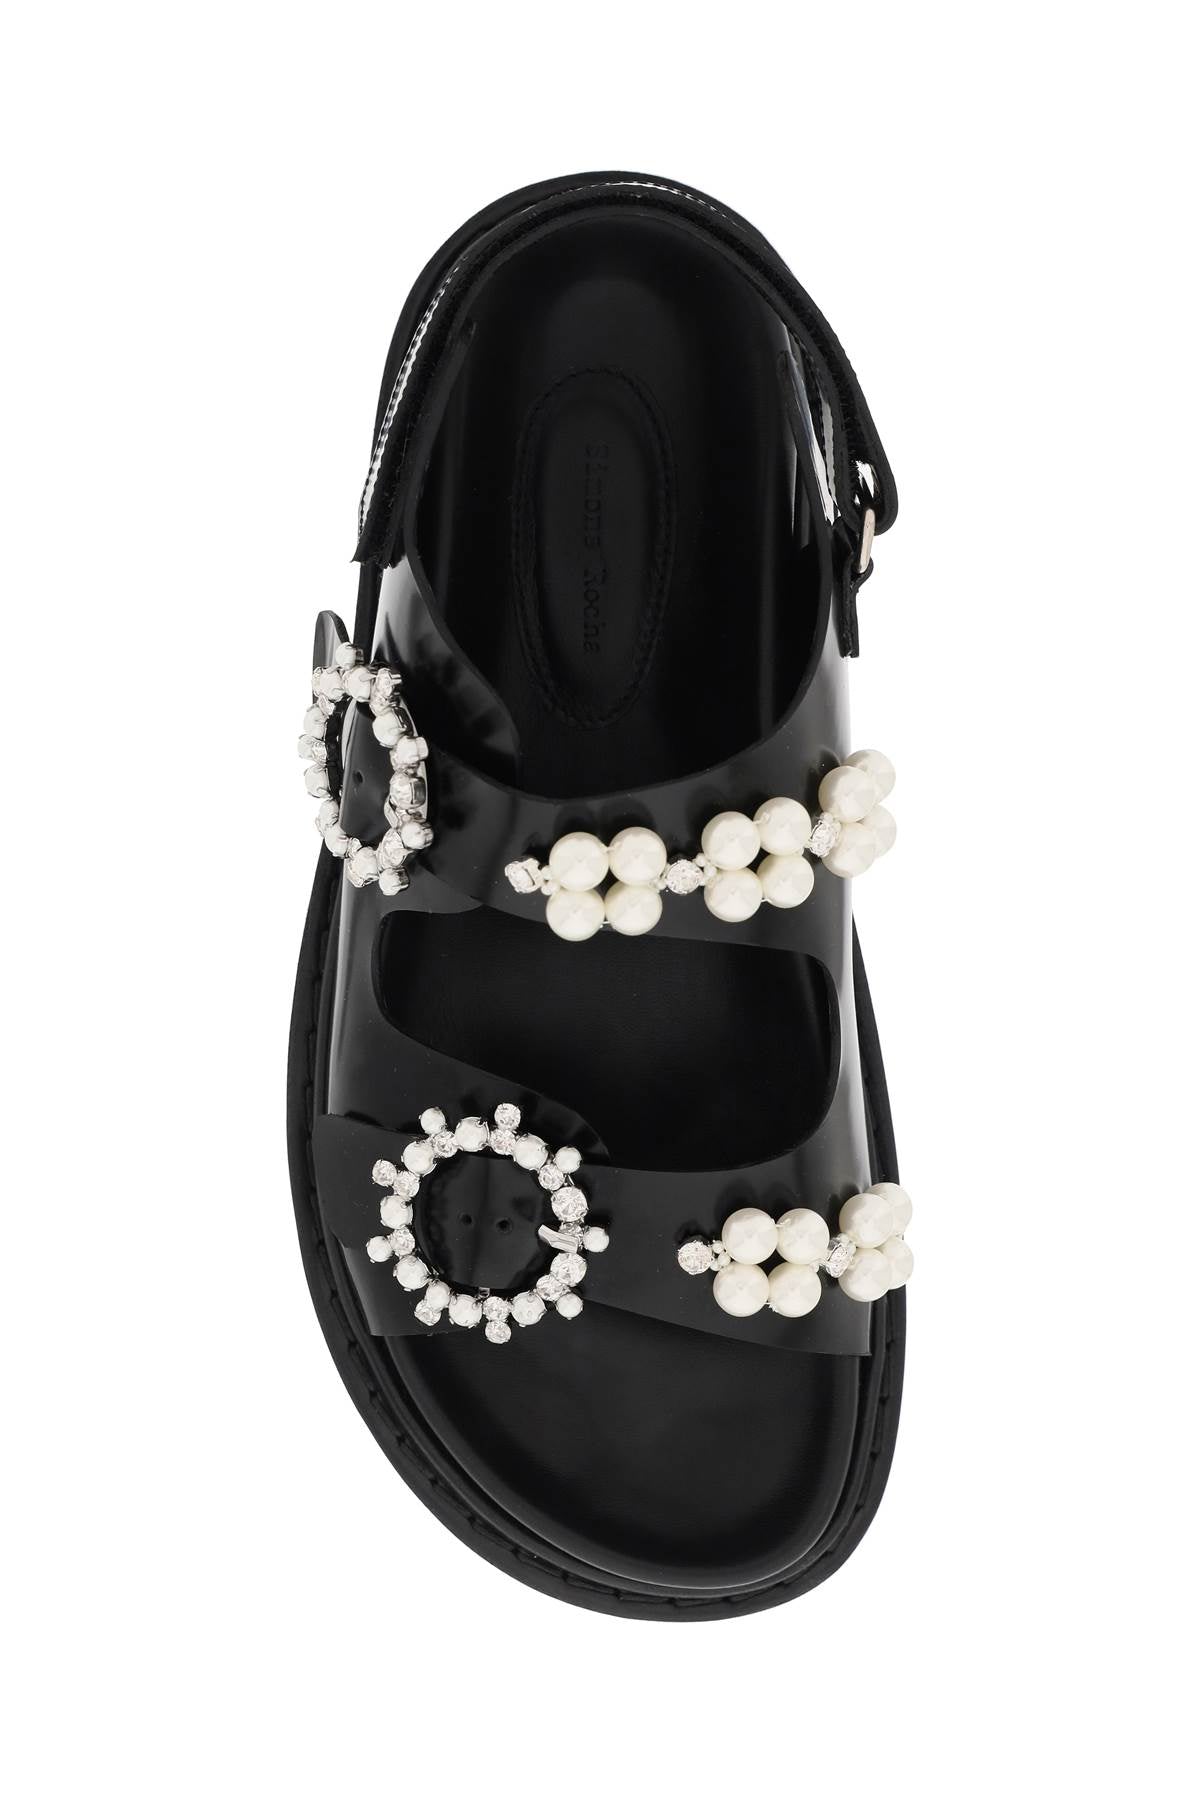 Simone rocha platform sandals with pearls and crystals-1